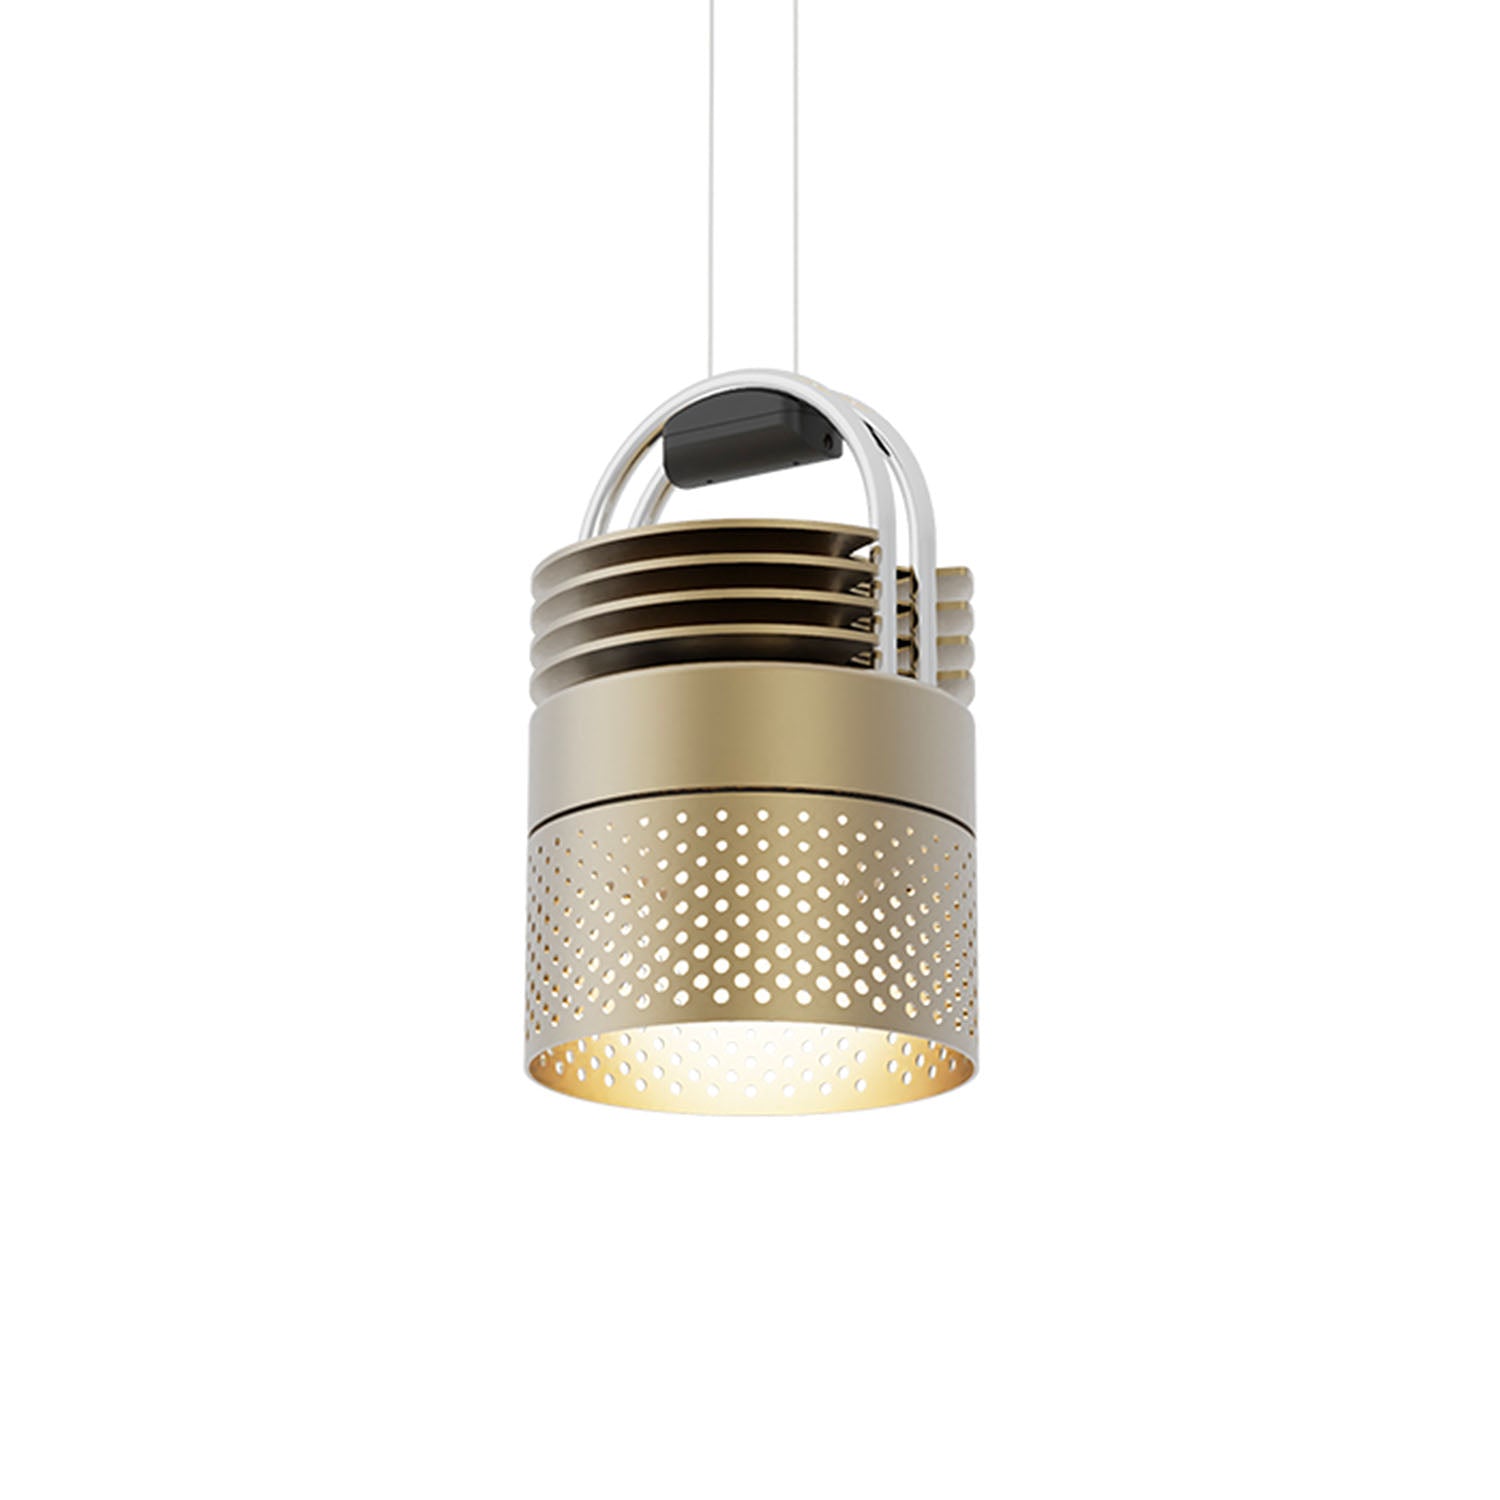 AIRMOD Perforated - Contemporary pendant light in perforated steel